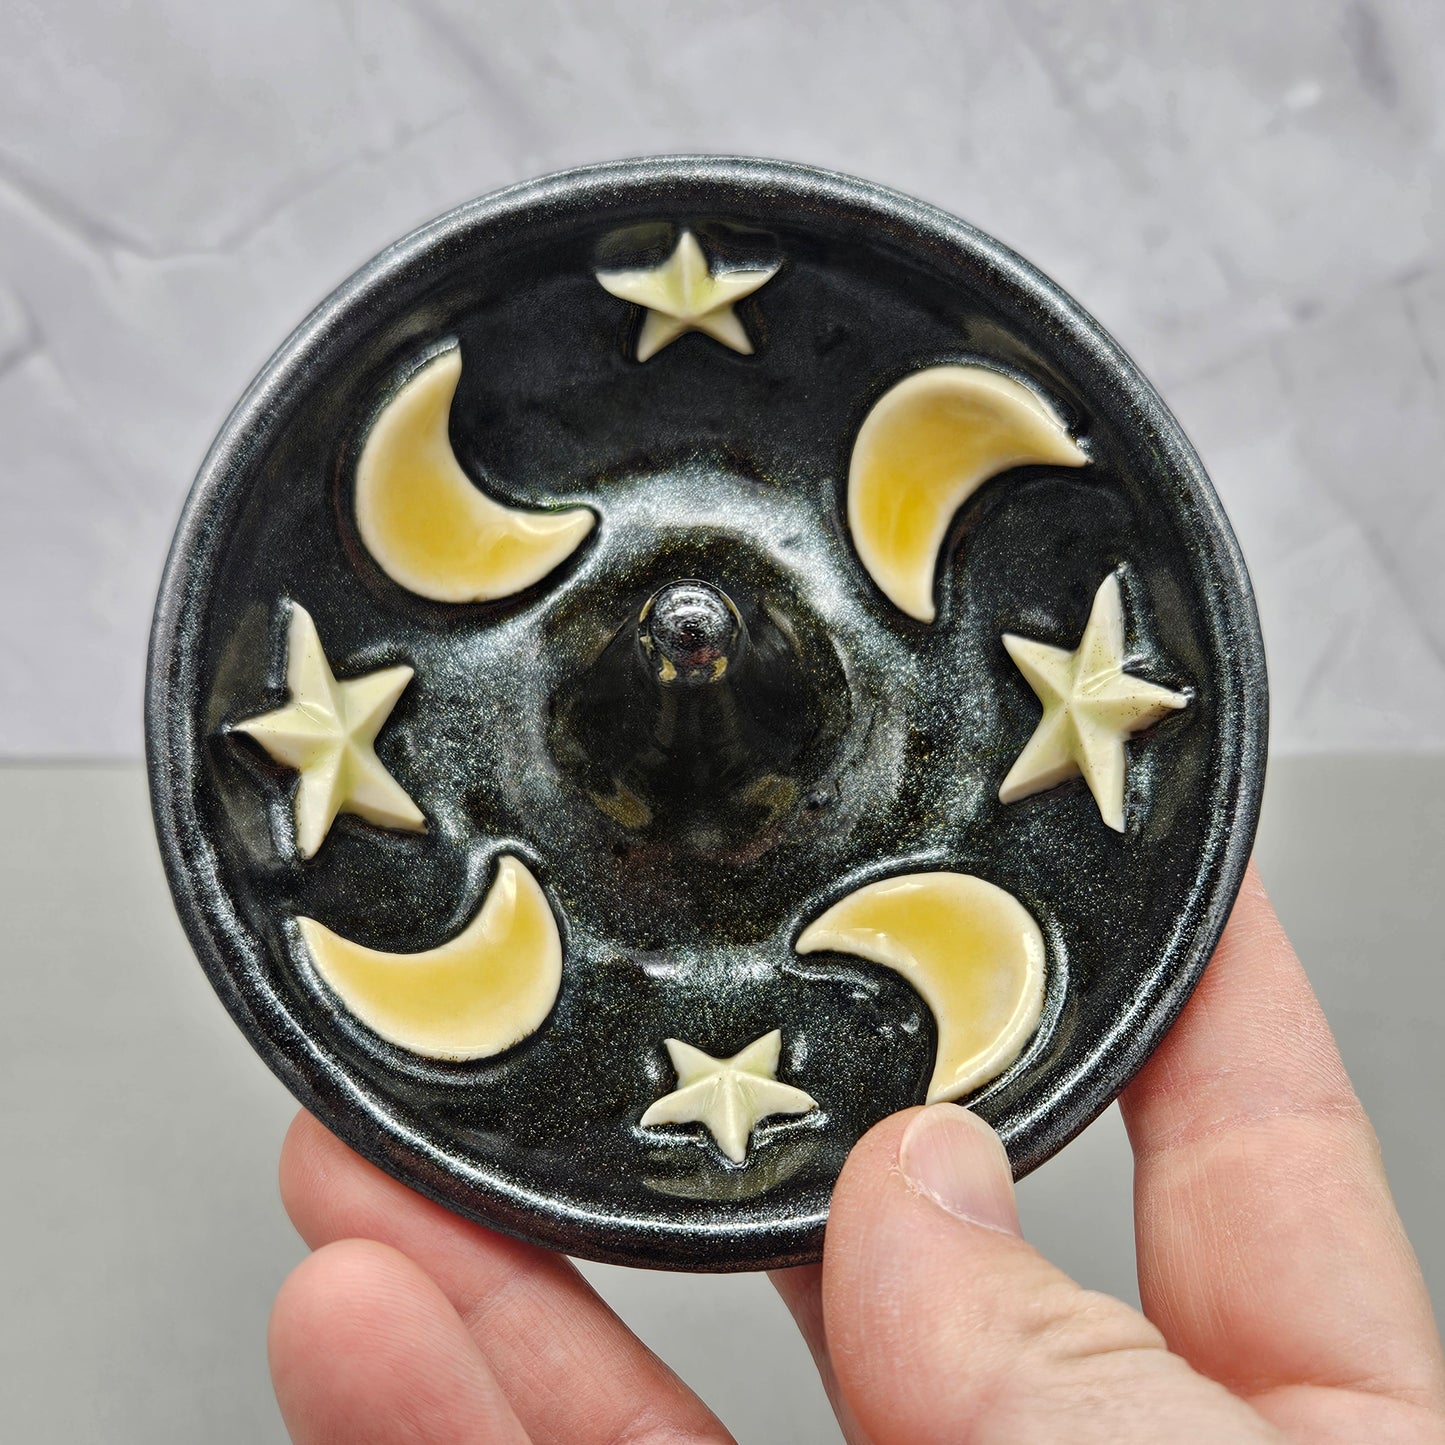 Moon light ring dishes